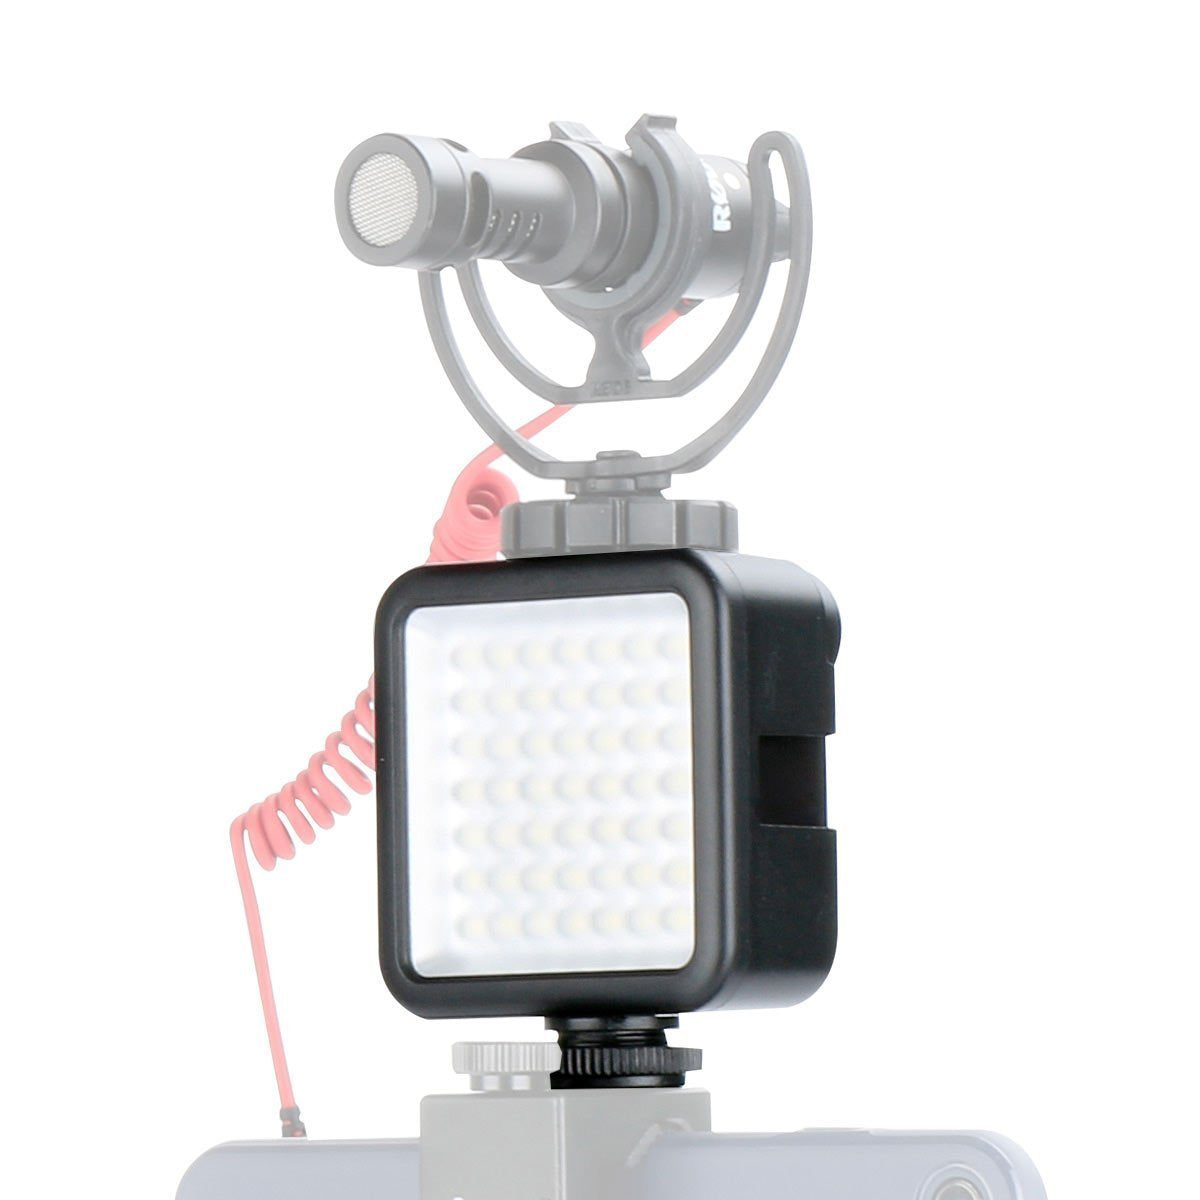 Ulanzi W49LED Video Light 49 LED with 3 Hot Shoe Dimmable Portable Video Light for DSLR or Smartphone